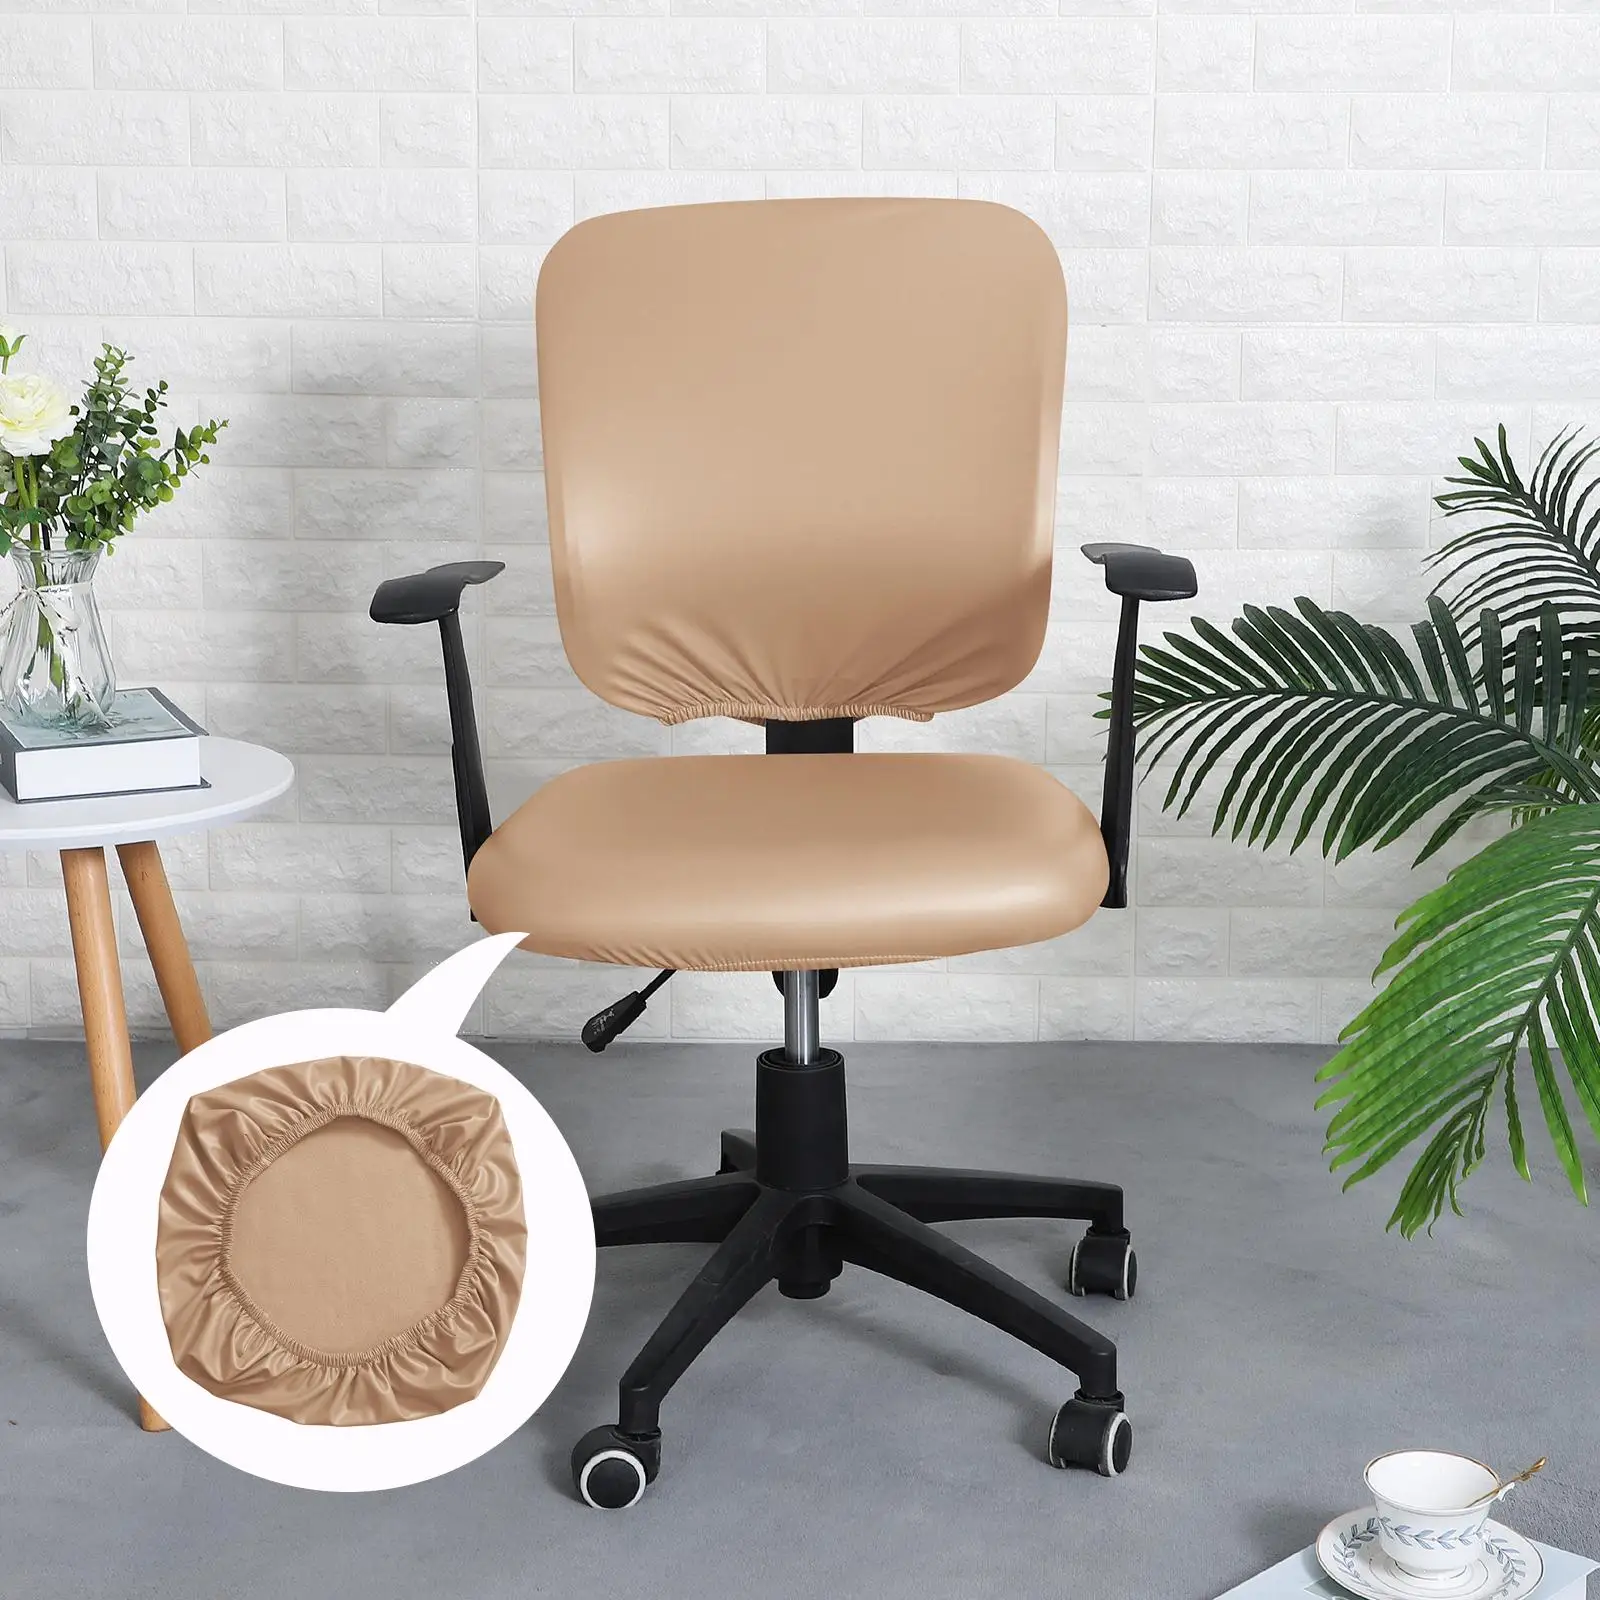 Modern Chair Seat Cover Slipcover Dustproof Removable Chair Seat Protectors Non Slip 15